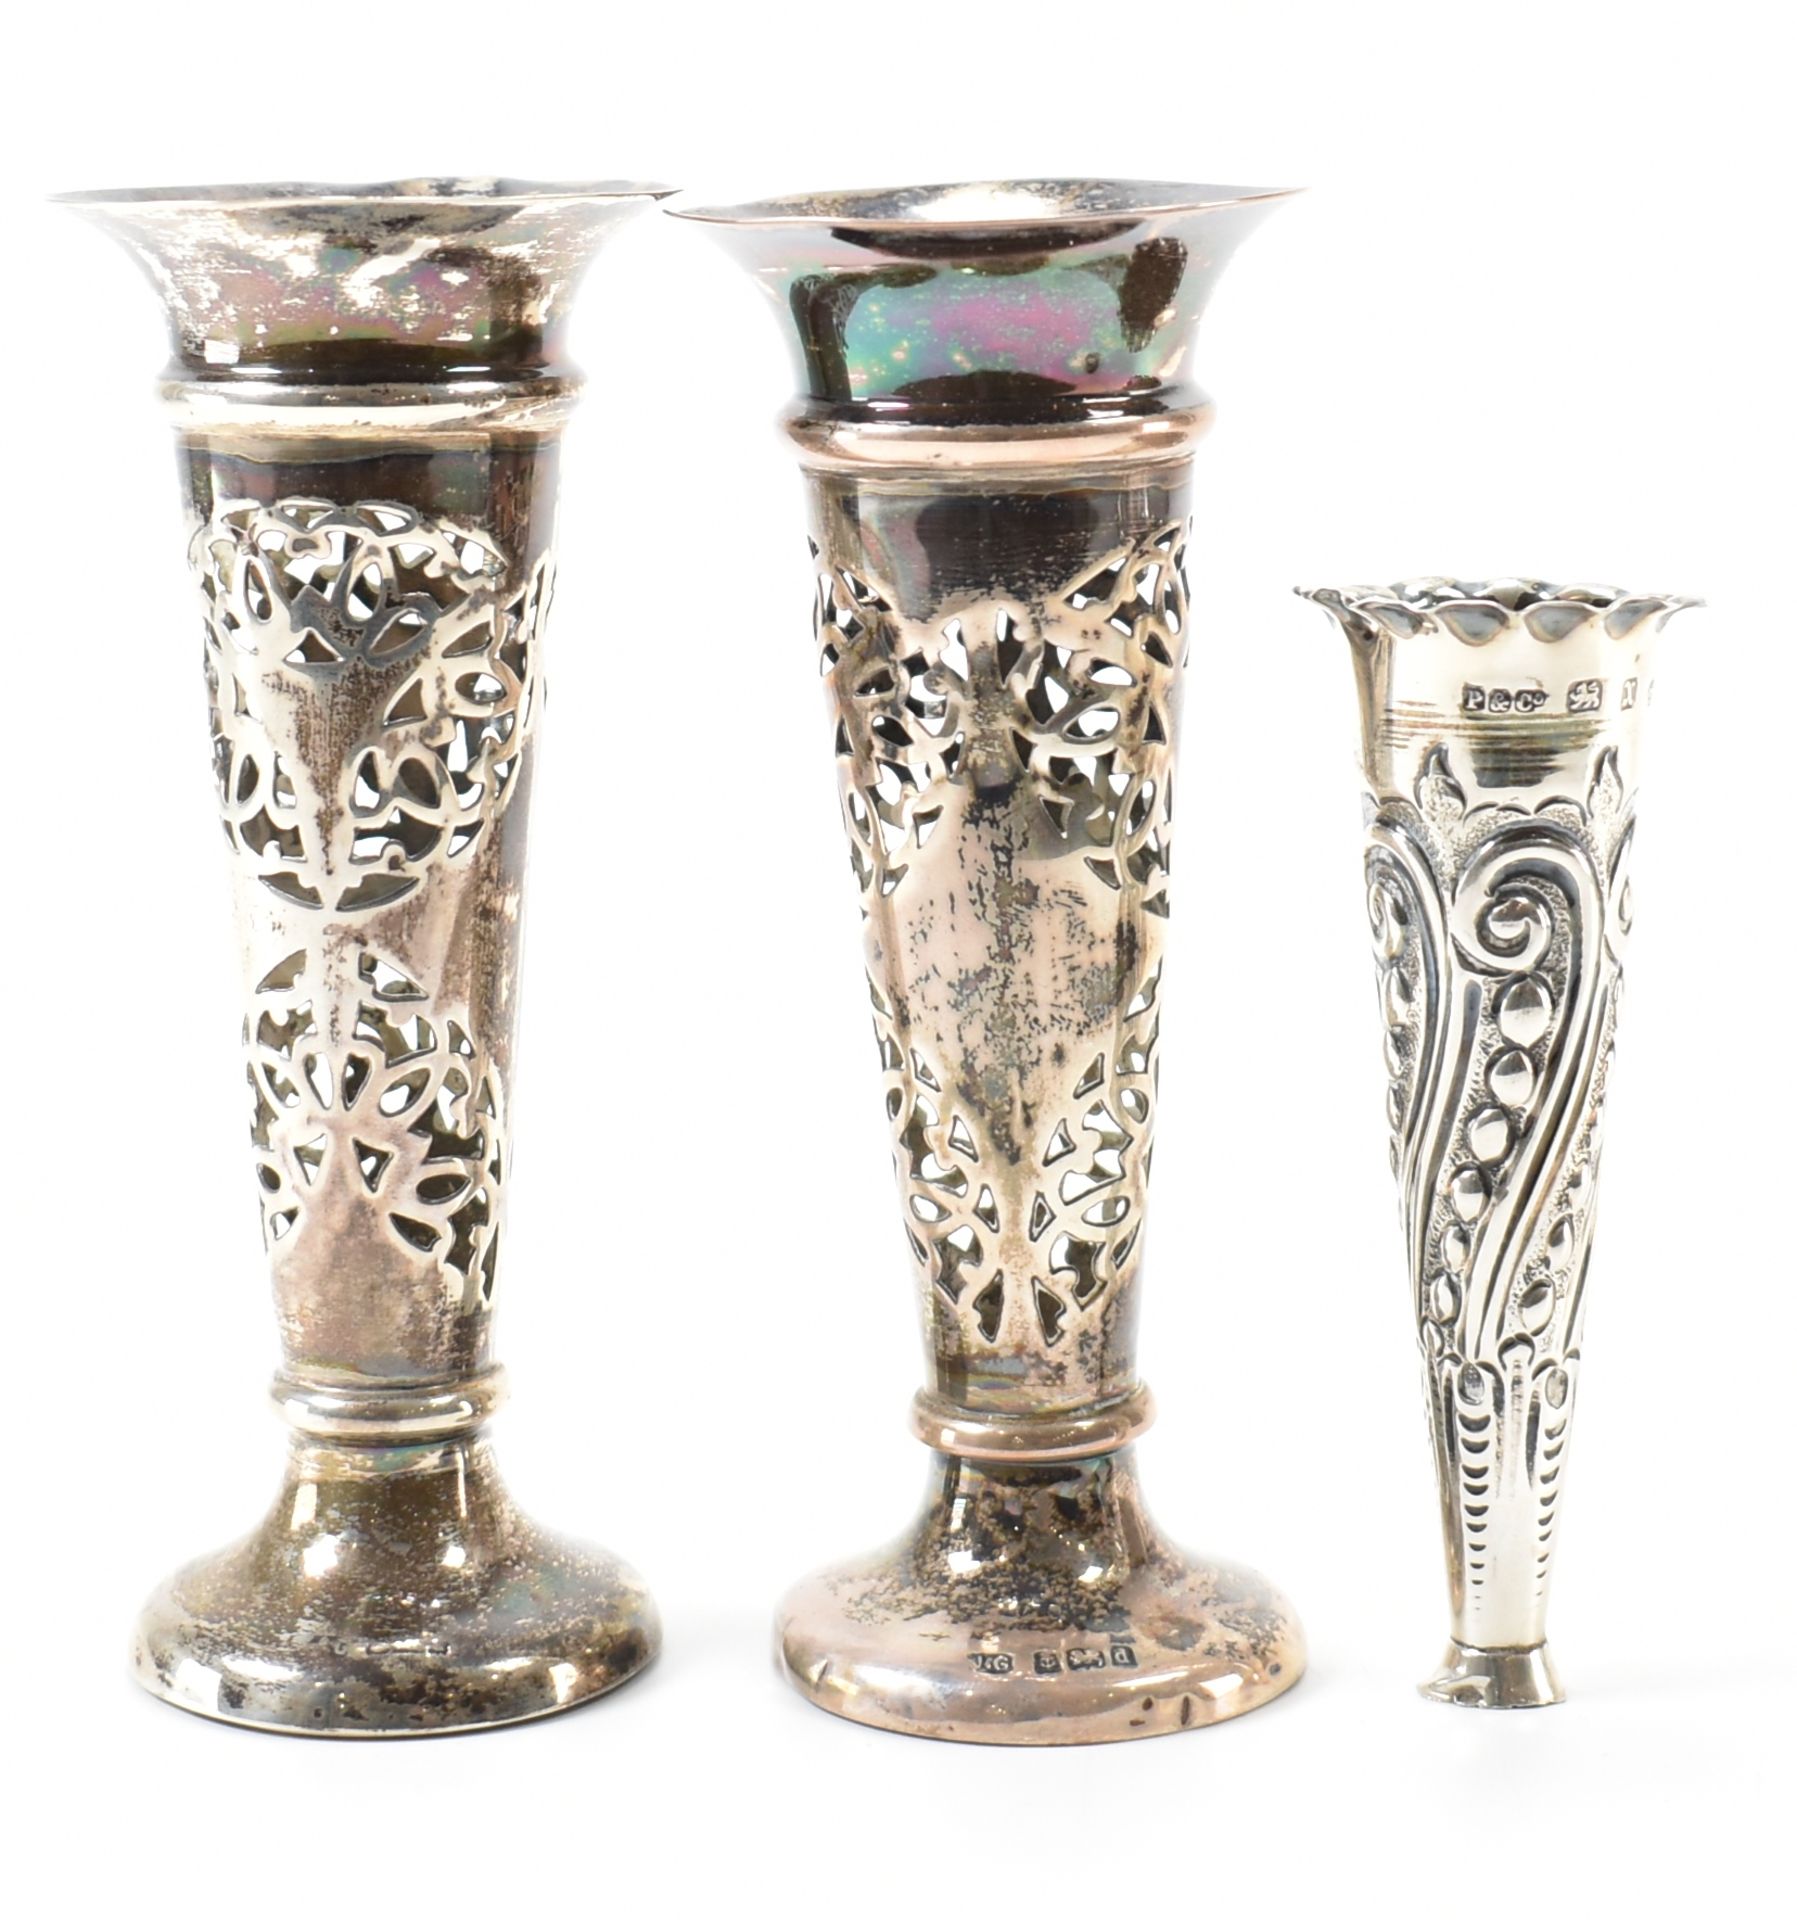 PAIR OF EDWARDIAN SILVER HALLMARKED SPILL VASES - Image 2 of 6